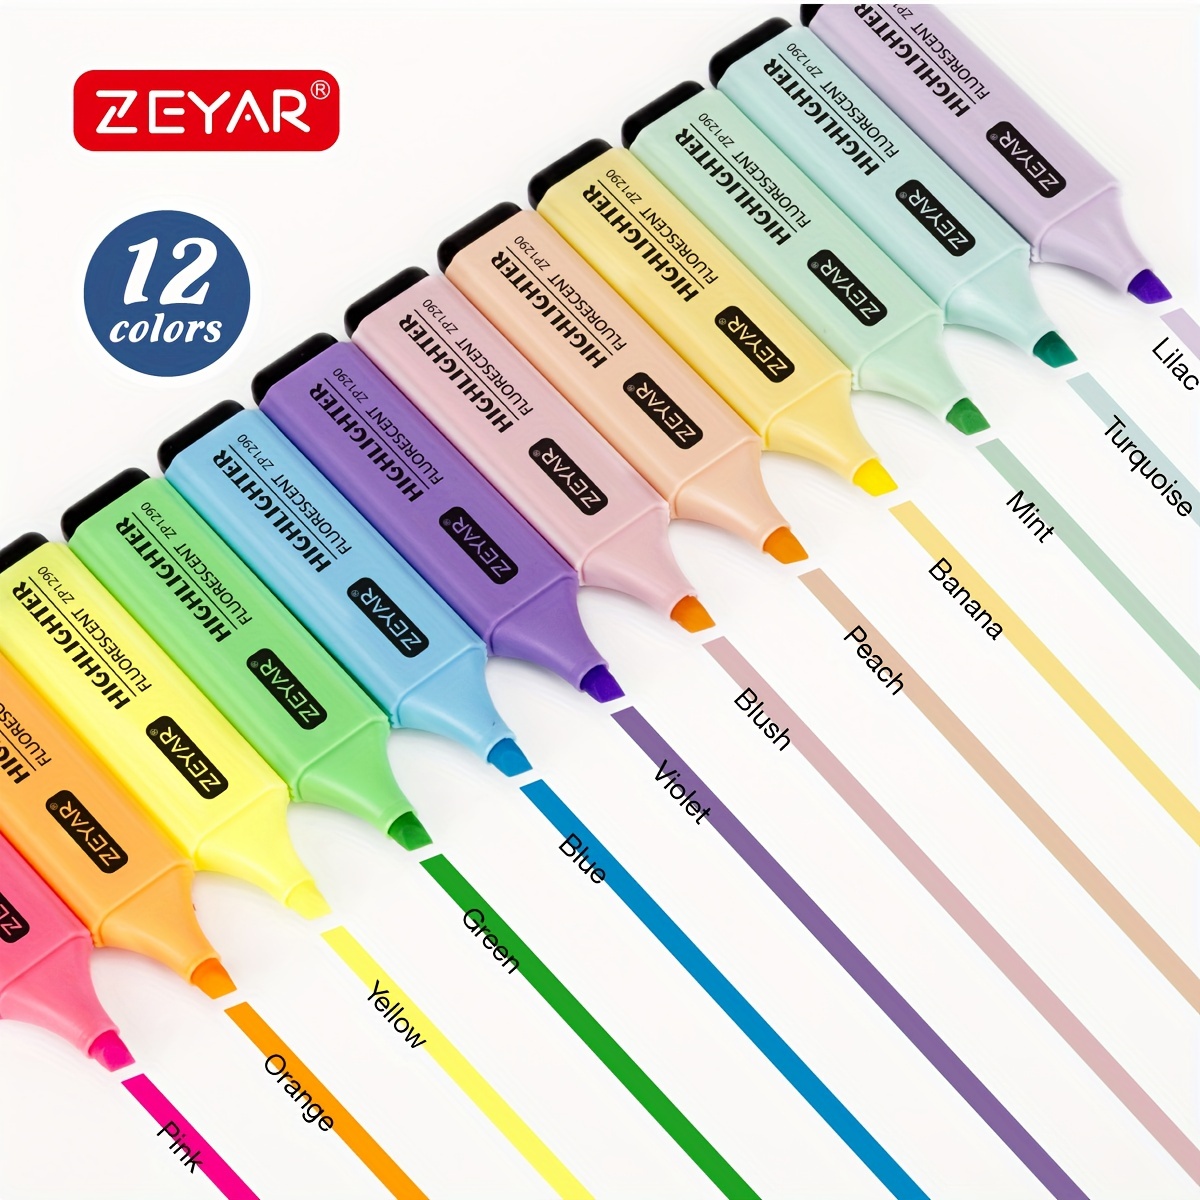 ZEYAR Highlighter, Pastel Colors Chisel Tip Marker Pen, AP Certified,  Assorted Colors, Water Based, Quick Dry